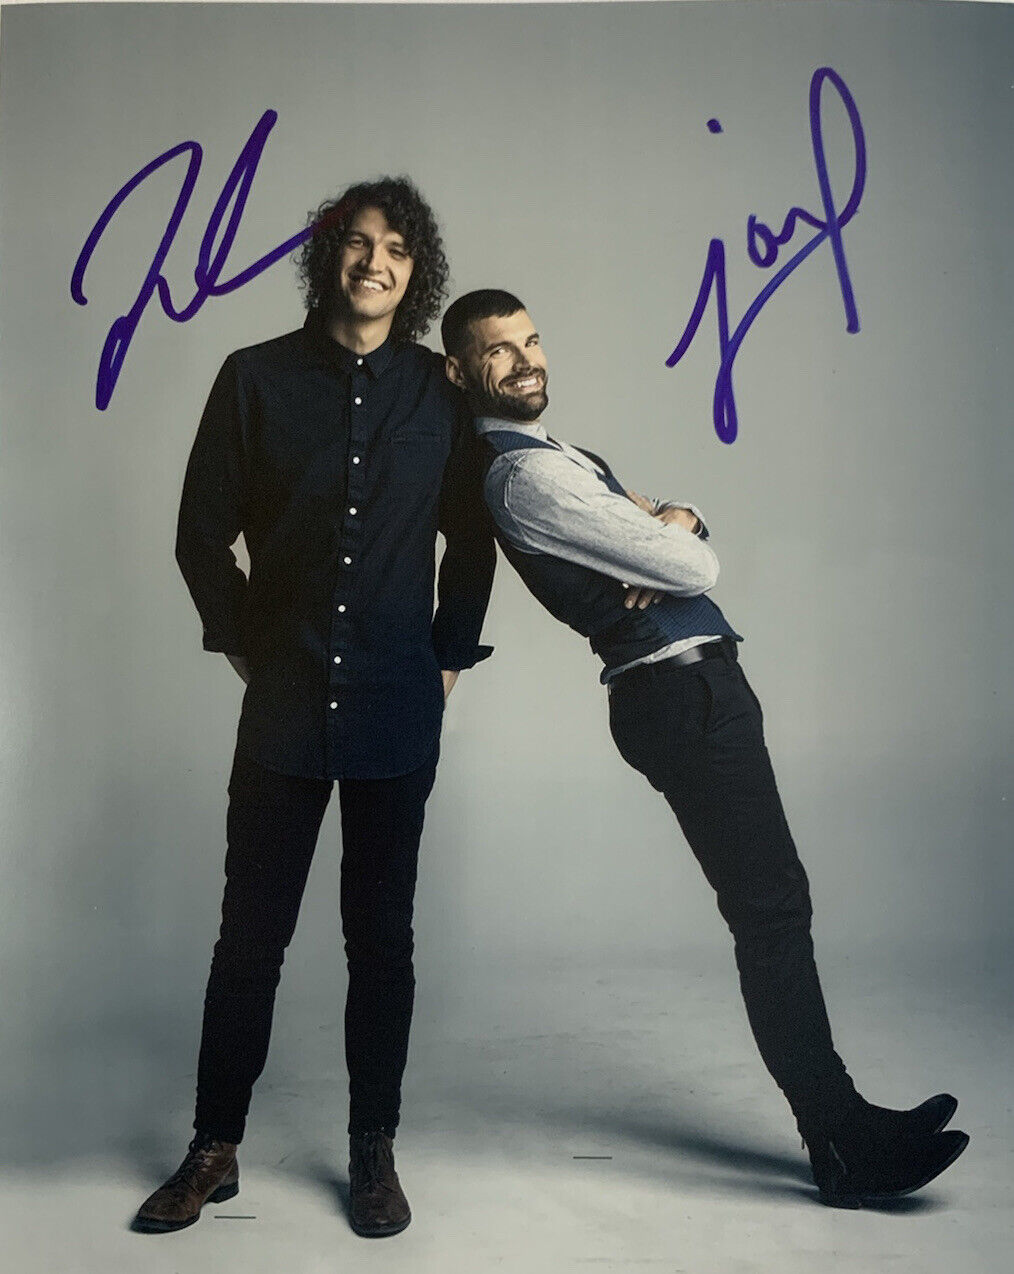 FOR KING AND COUNTRY HAND SIGNED 8x10 Photo Poster painting CHRISTIAN BAND AUTOGRAPH RARE COA